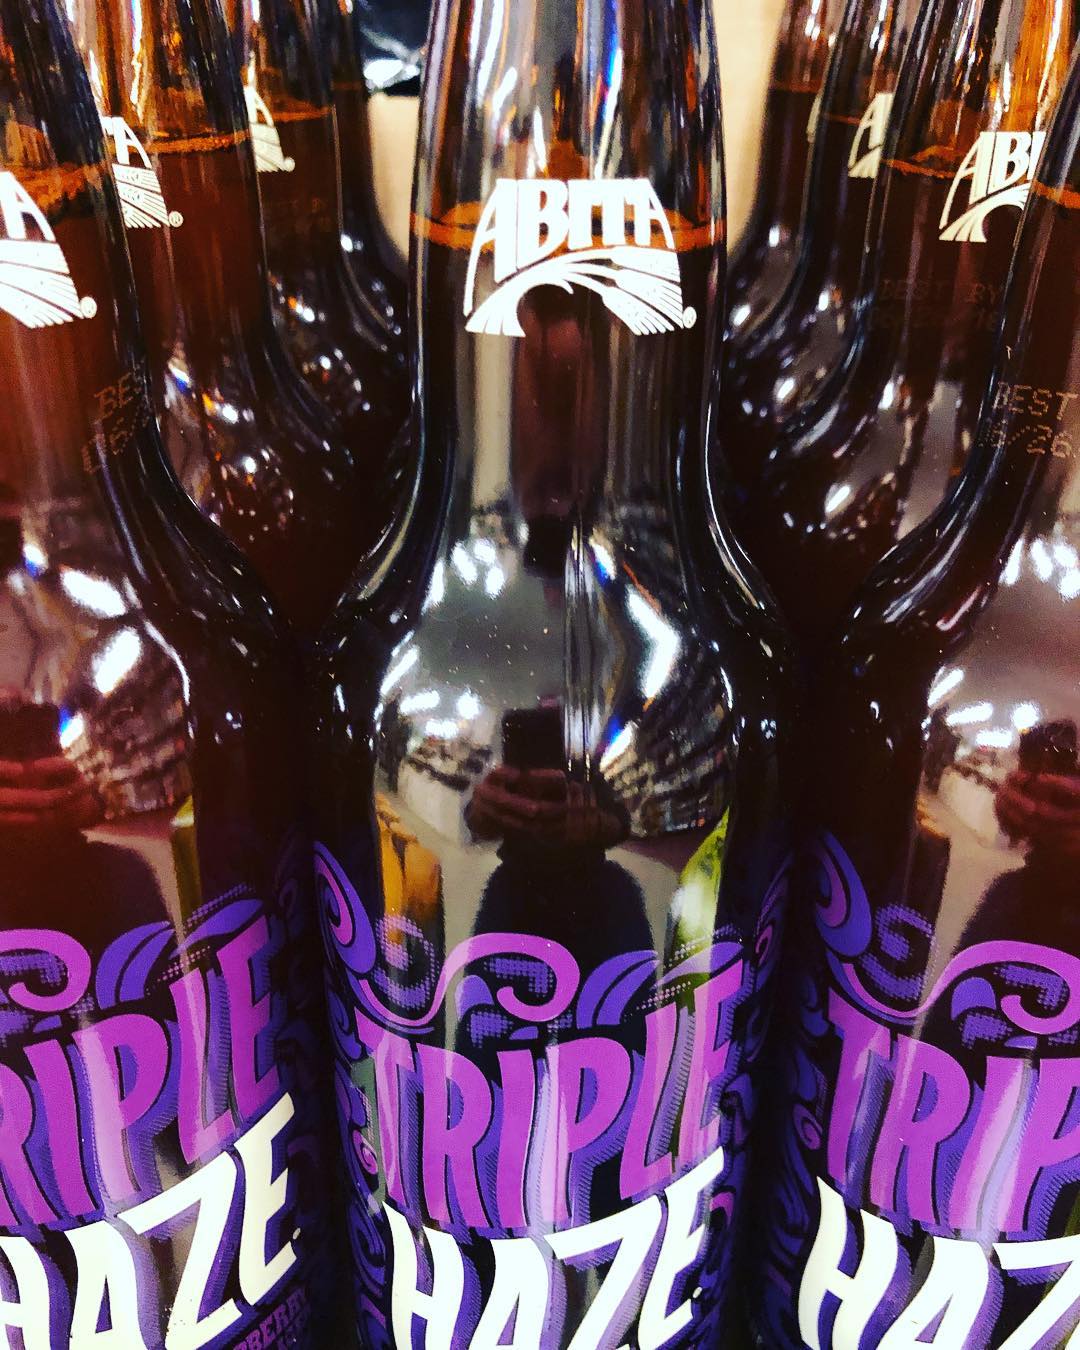 @abitabeer Triple Haze Raspberry Golden Lager is now in stock at our Perkins Rd location!…